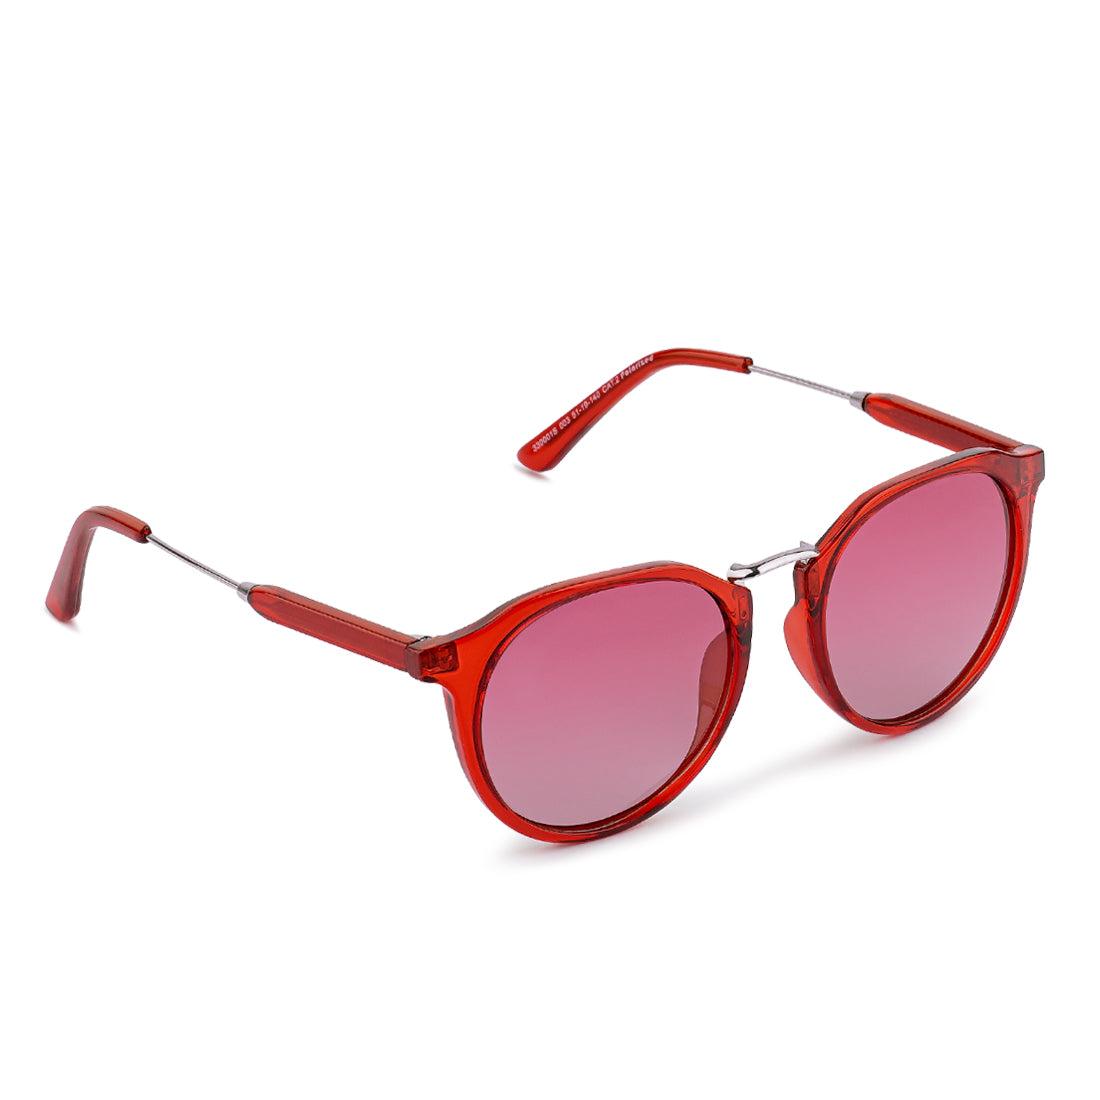 Printed Frame Cateye Sunglasses In Red